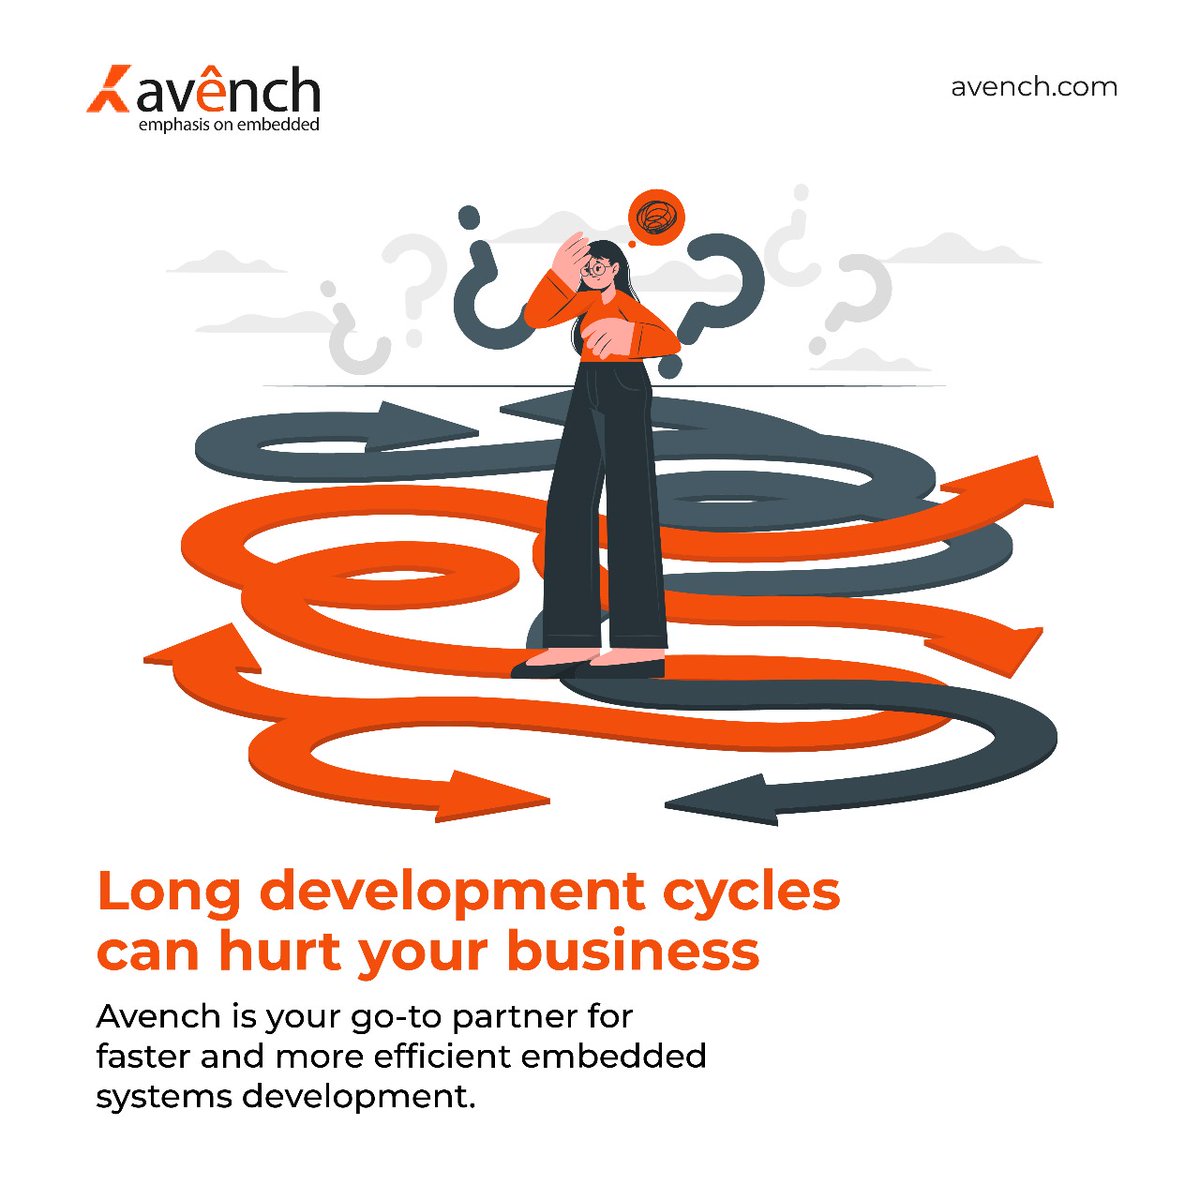 Achieve your embedded system goals efficiently with Avench! Experienced engineers & streamlined processes for faster, cost-effective development. Call for a free consultation! avench.com #avenchsystem #embeddedsystem #IOTsystem #microcontrollers #embeddedsoftware